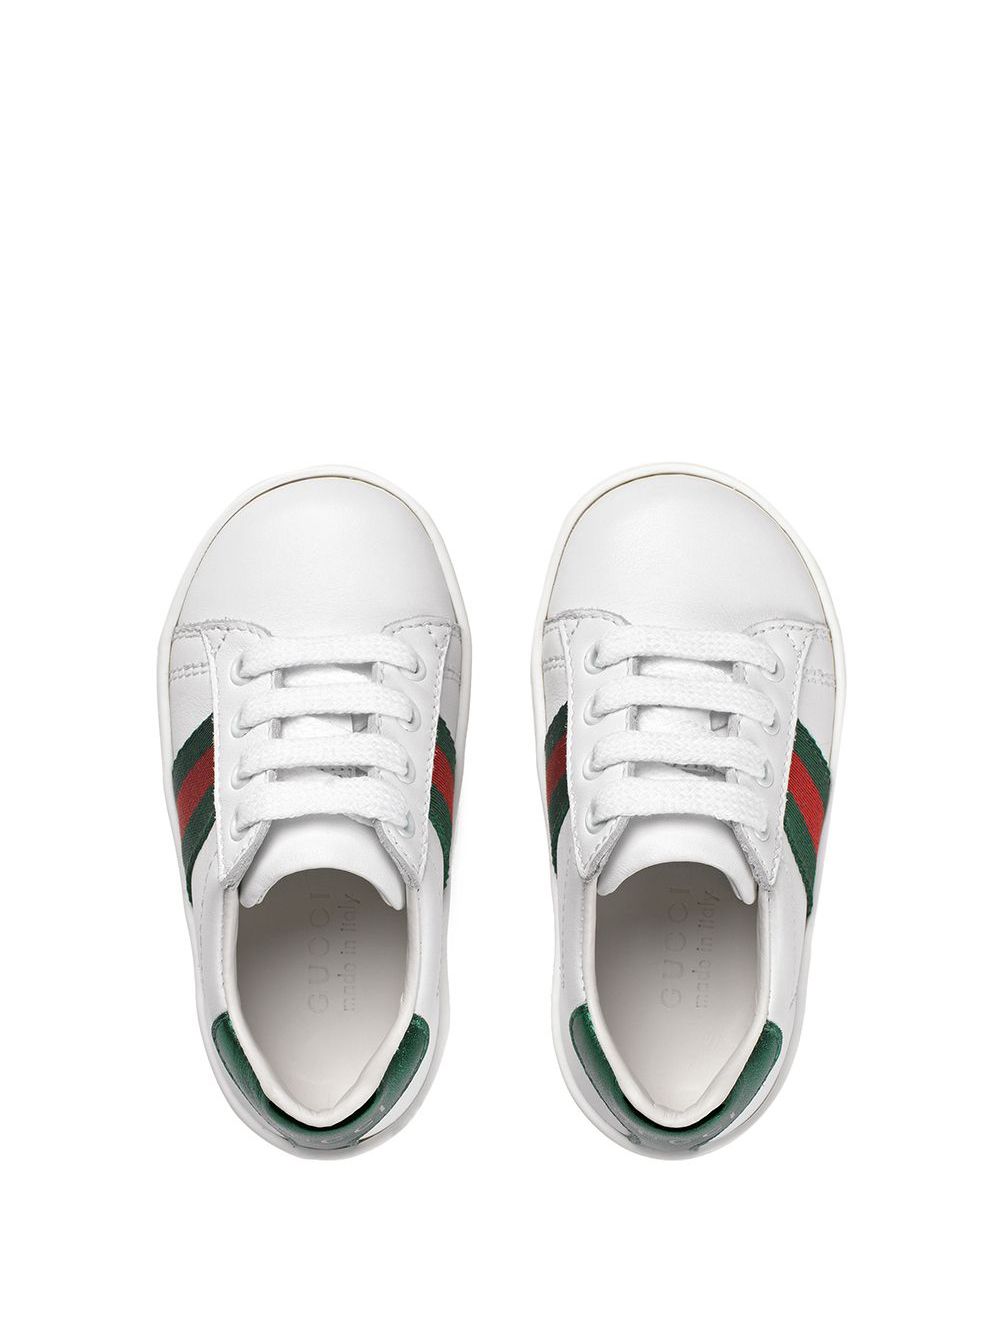 Gucci Kids Ace Leather Sneakers - Farfetch